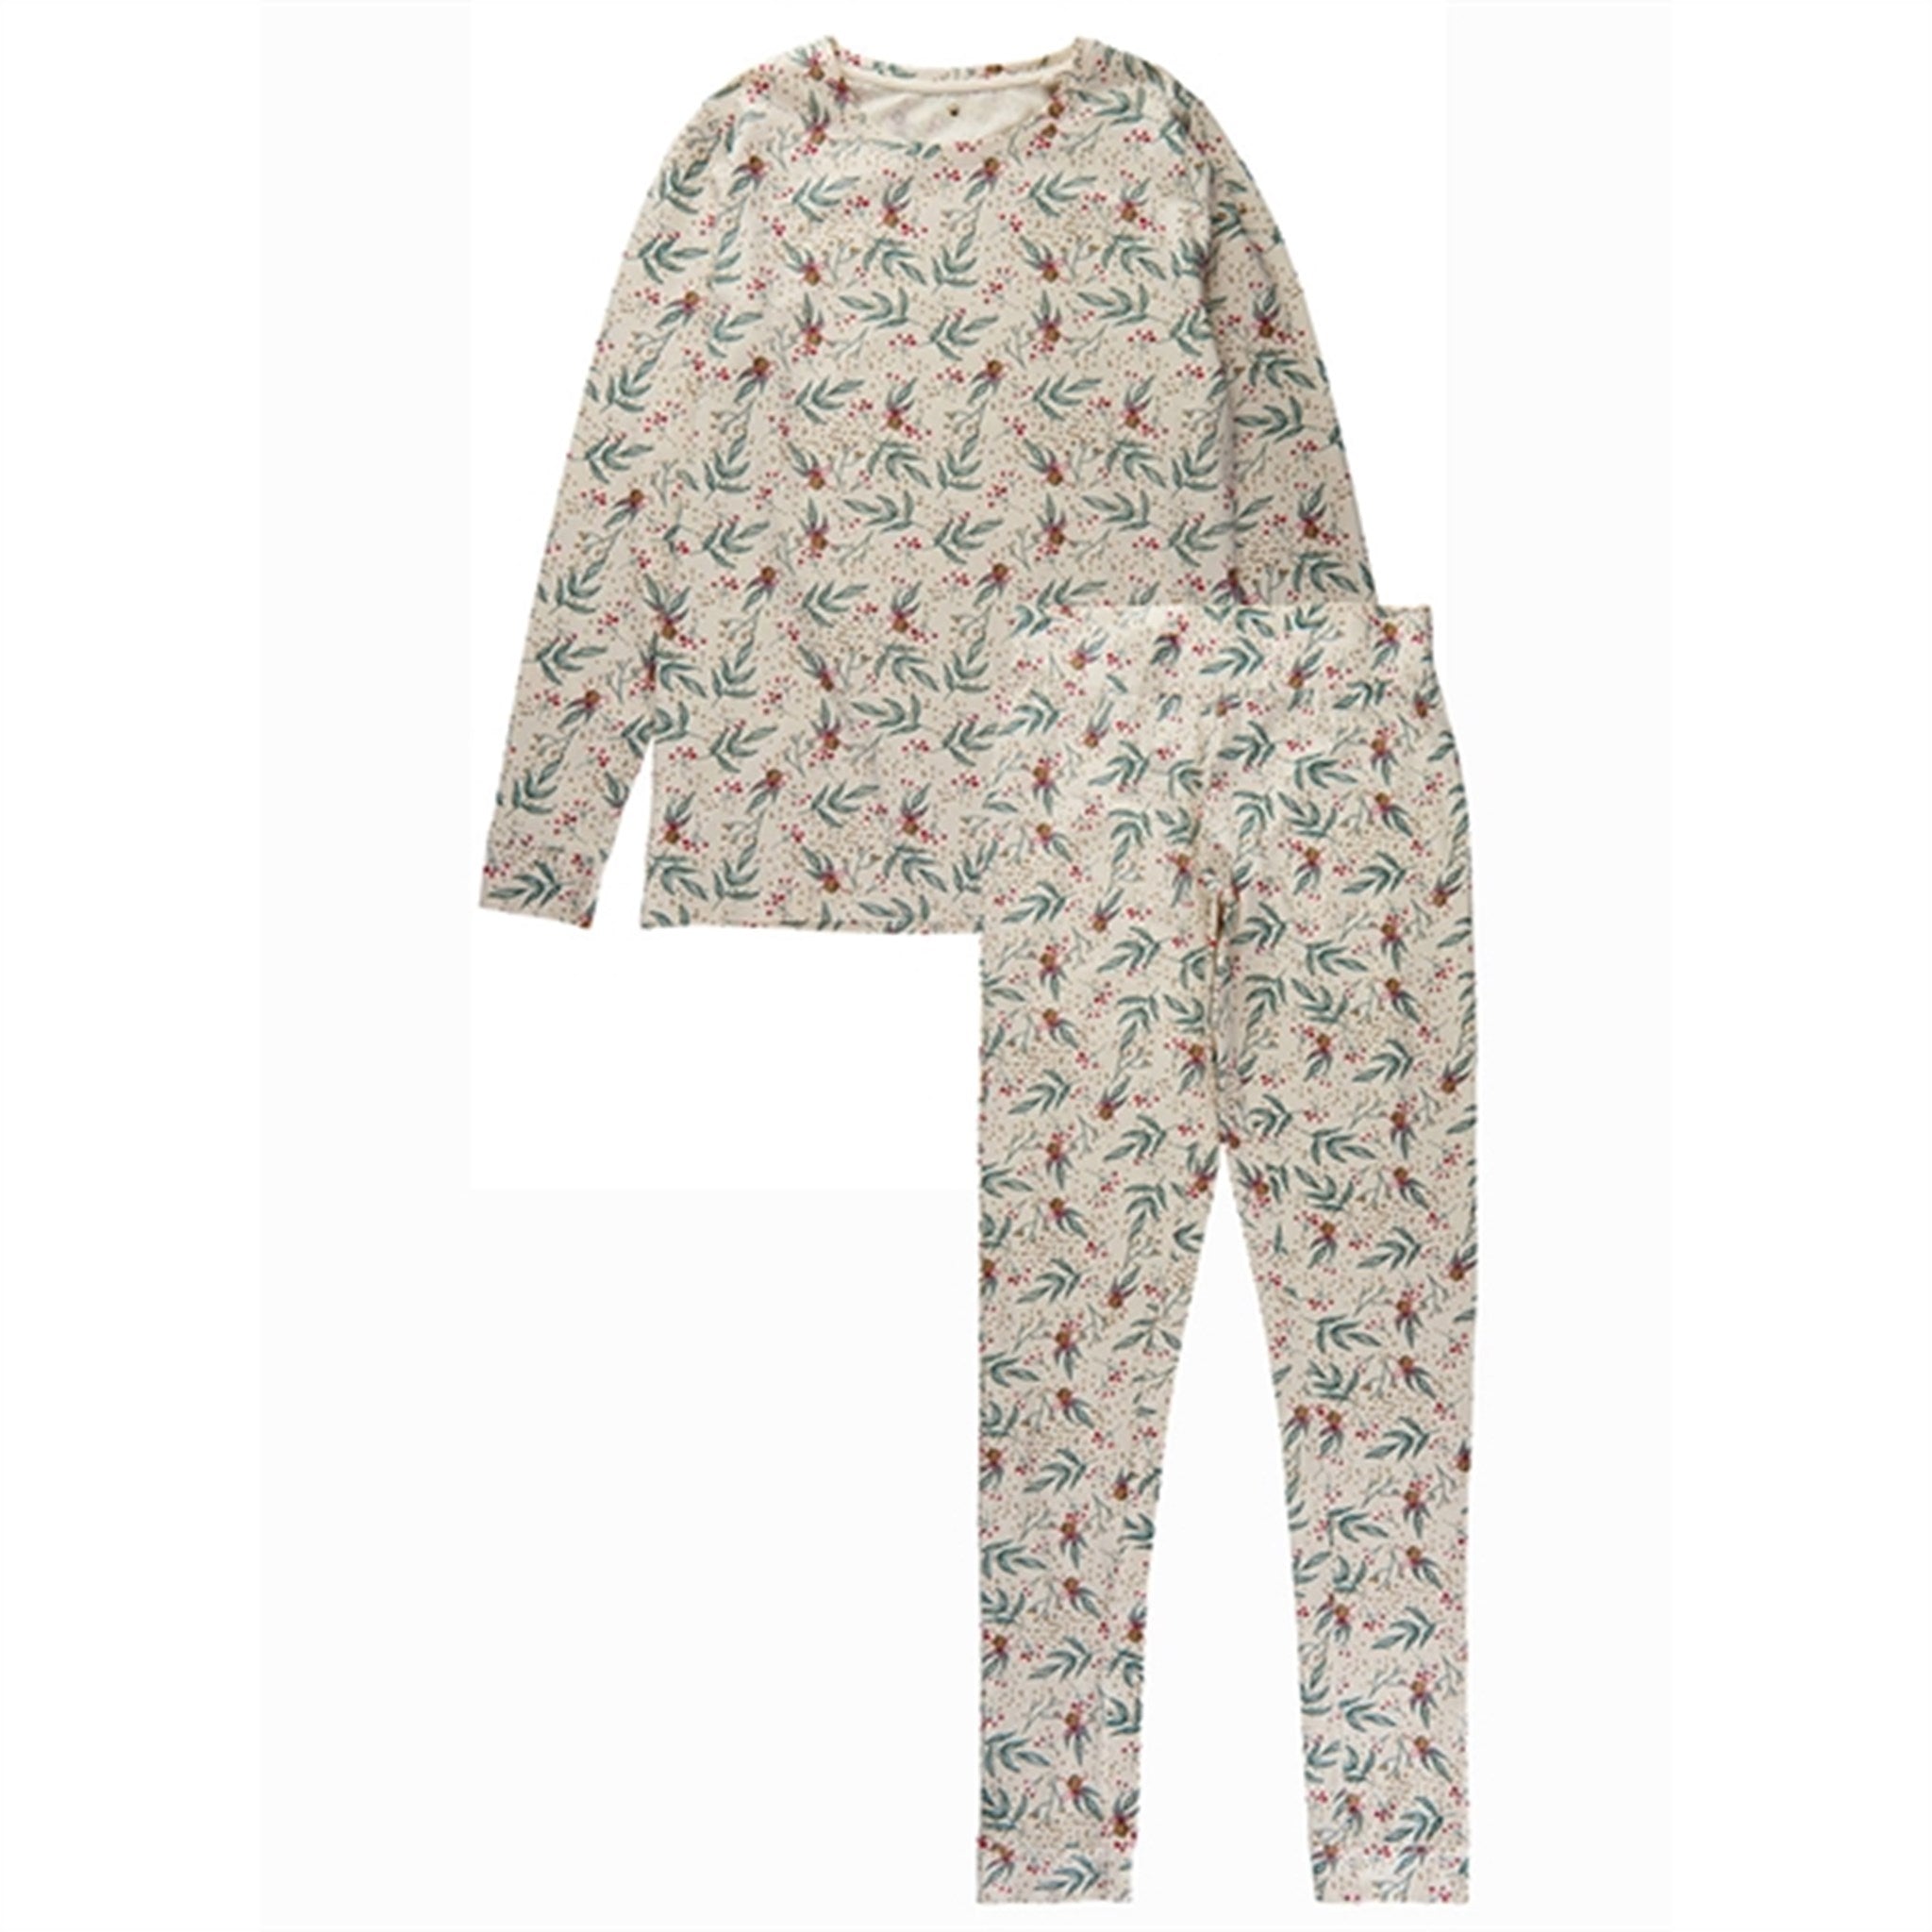 The New White Swan Bell Aop Holiday Pyjamas Adult